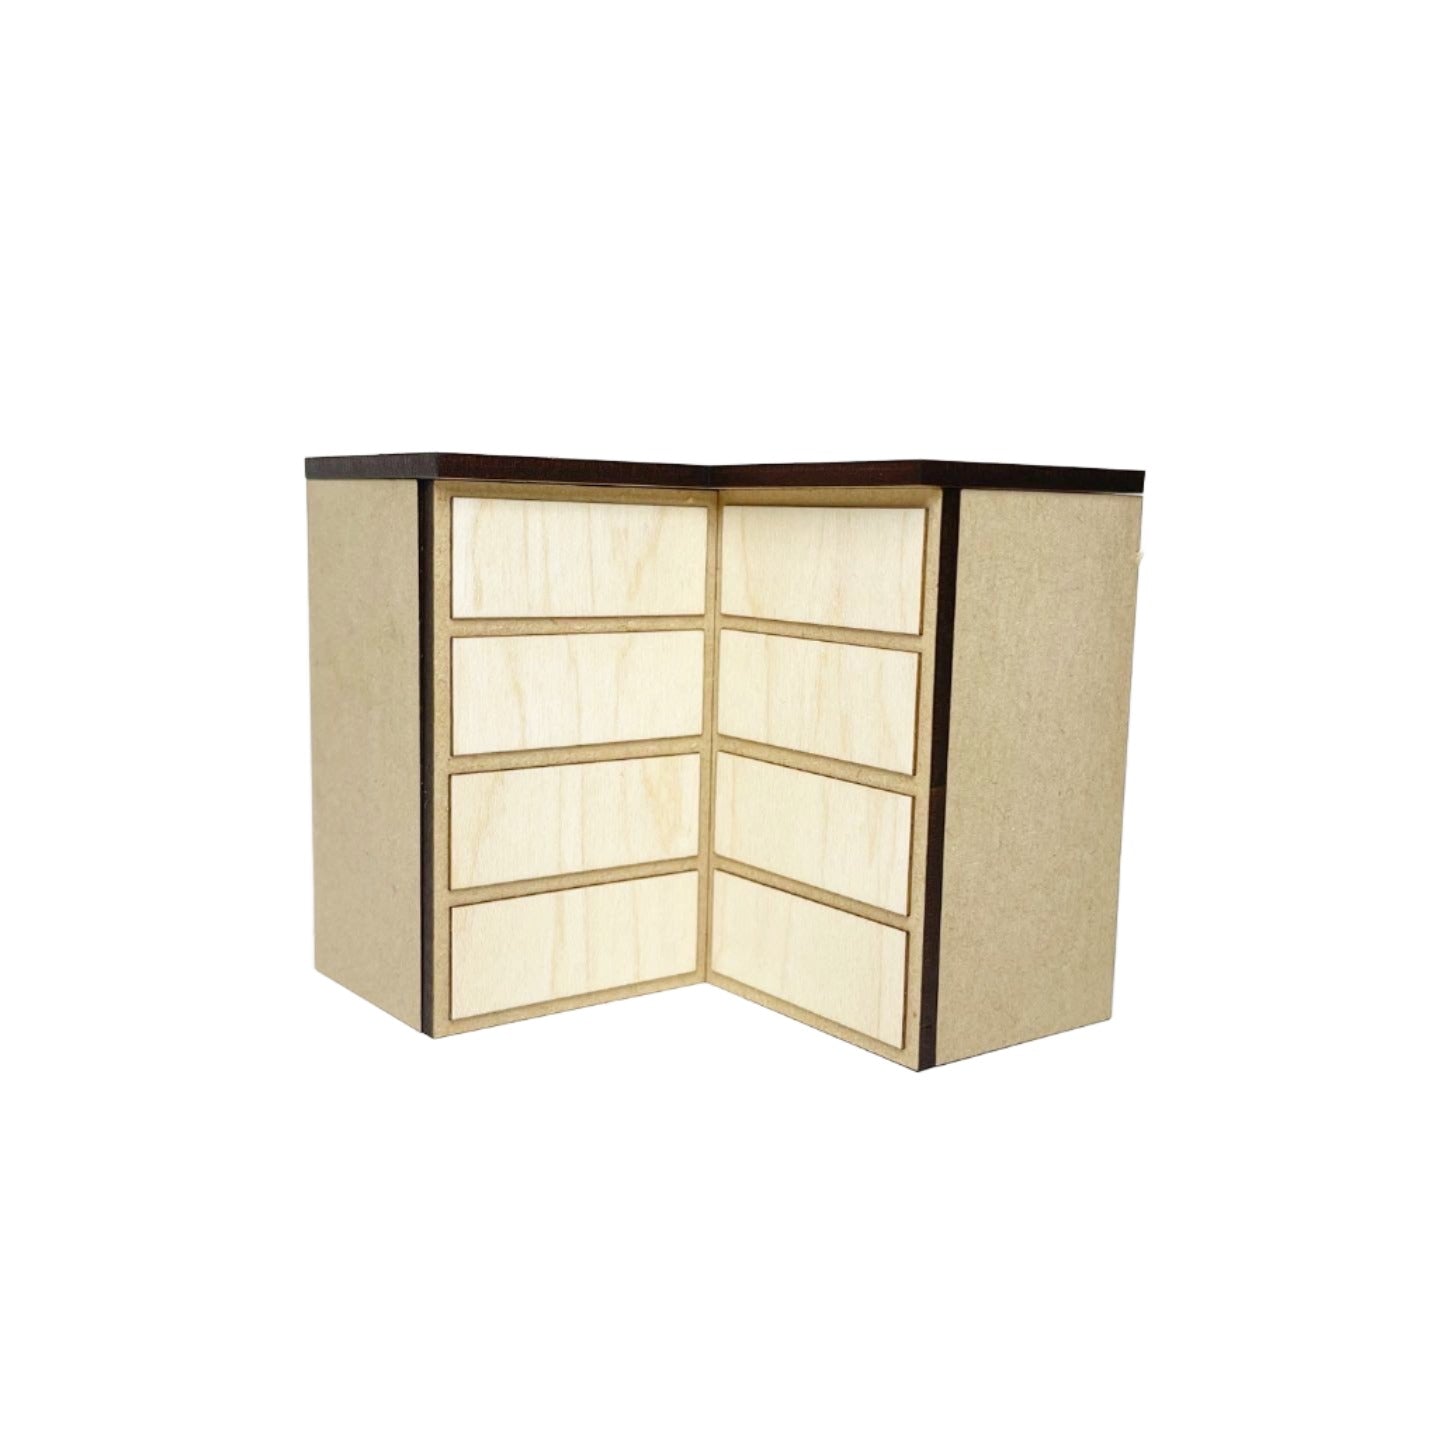 Corner Lower Cabinet with 4 Drawers, Standard